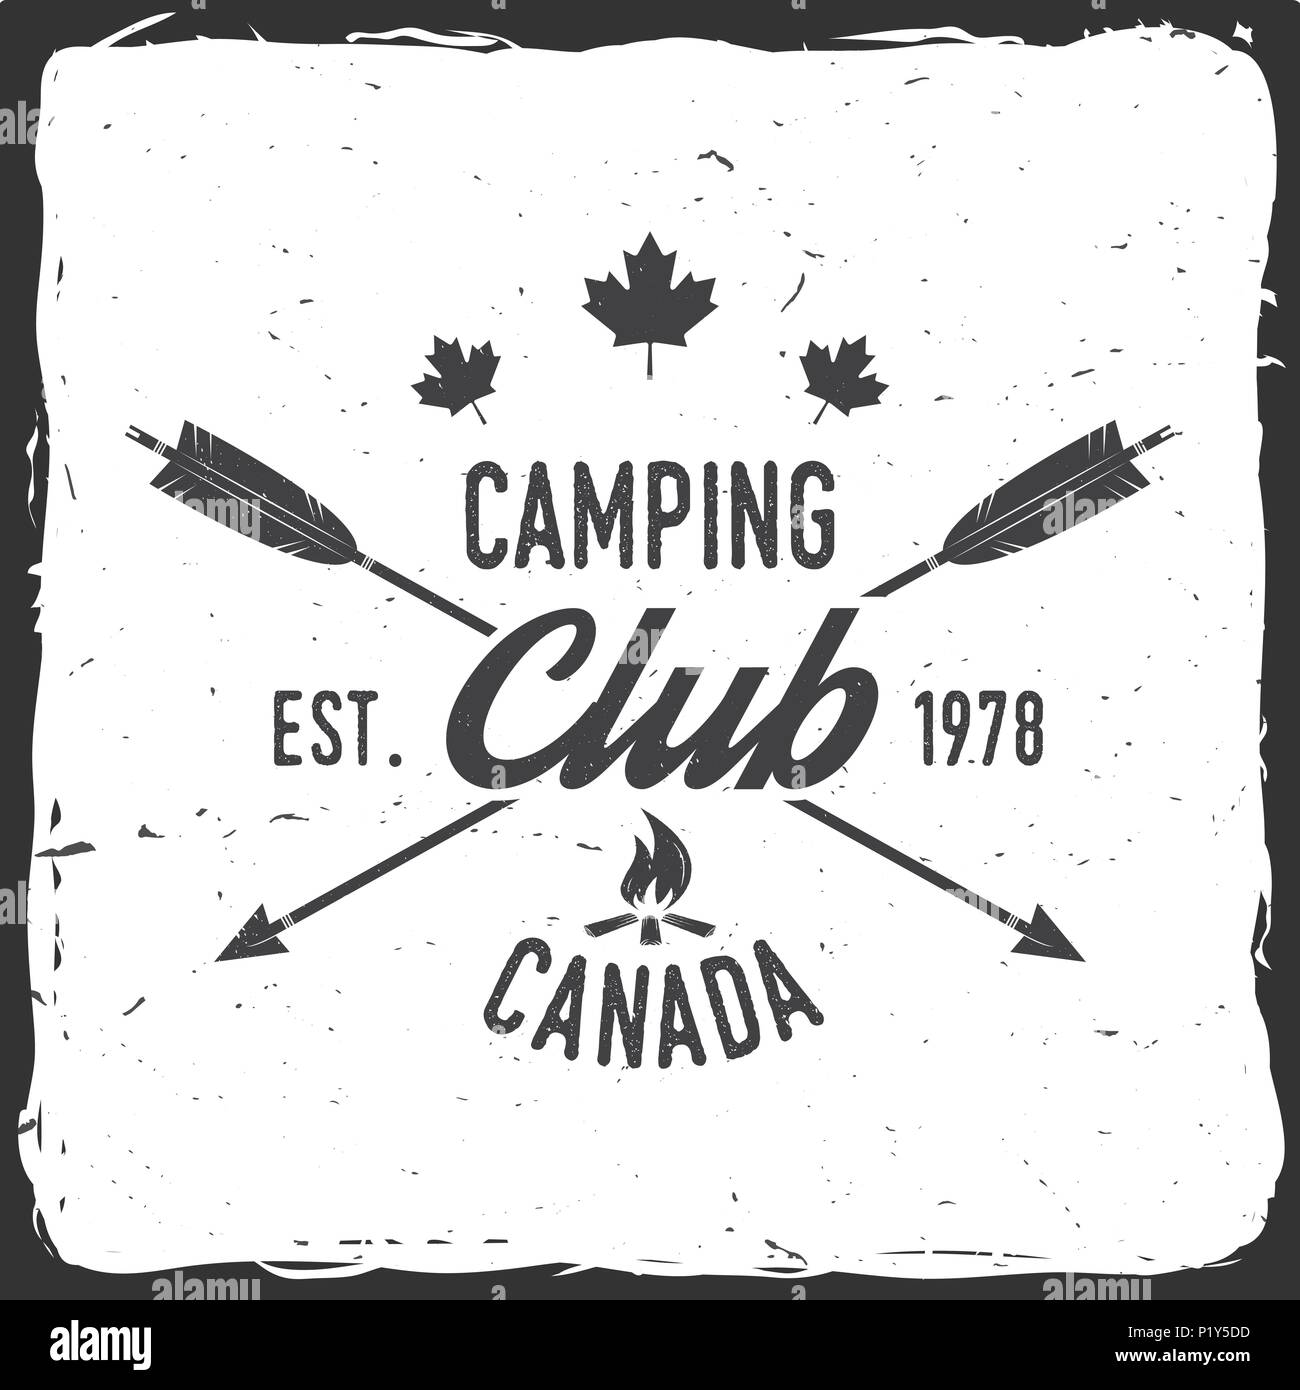 Camping club. Canada. Vector illustration. Concept for shirt or logo, print, stamp or tee. Vintage typography design with campfire and arrows silhouet Stock Vector